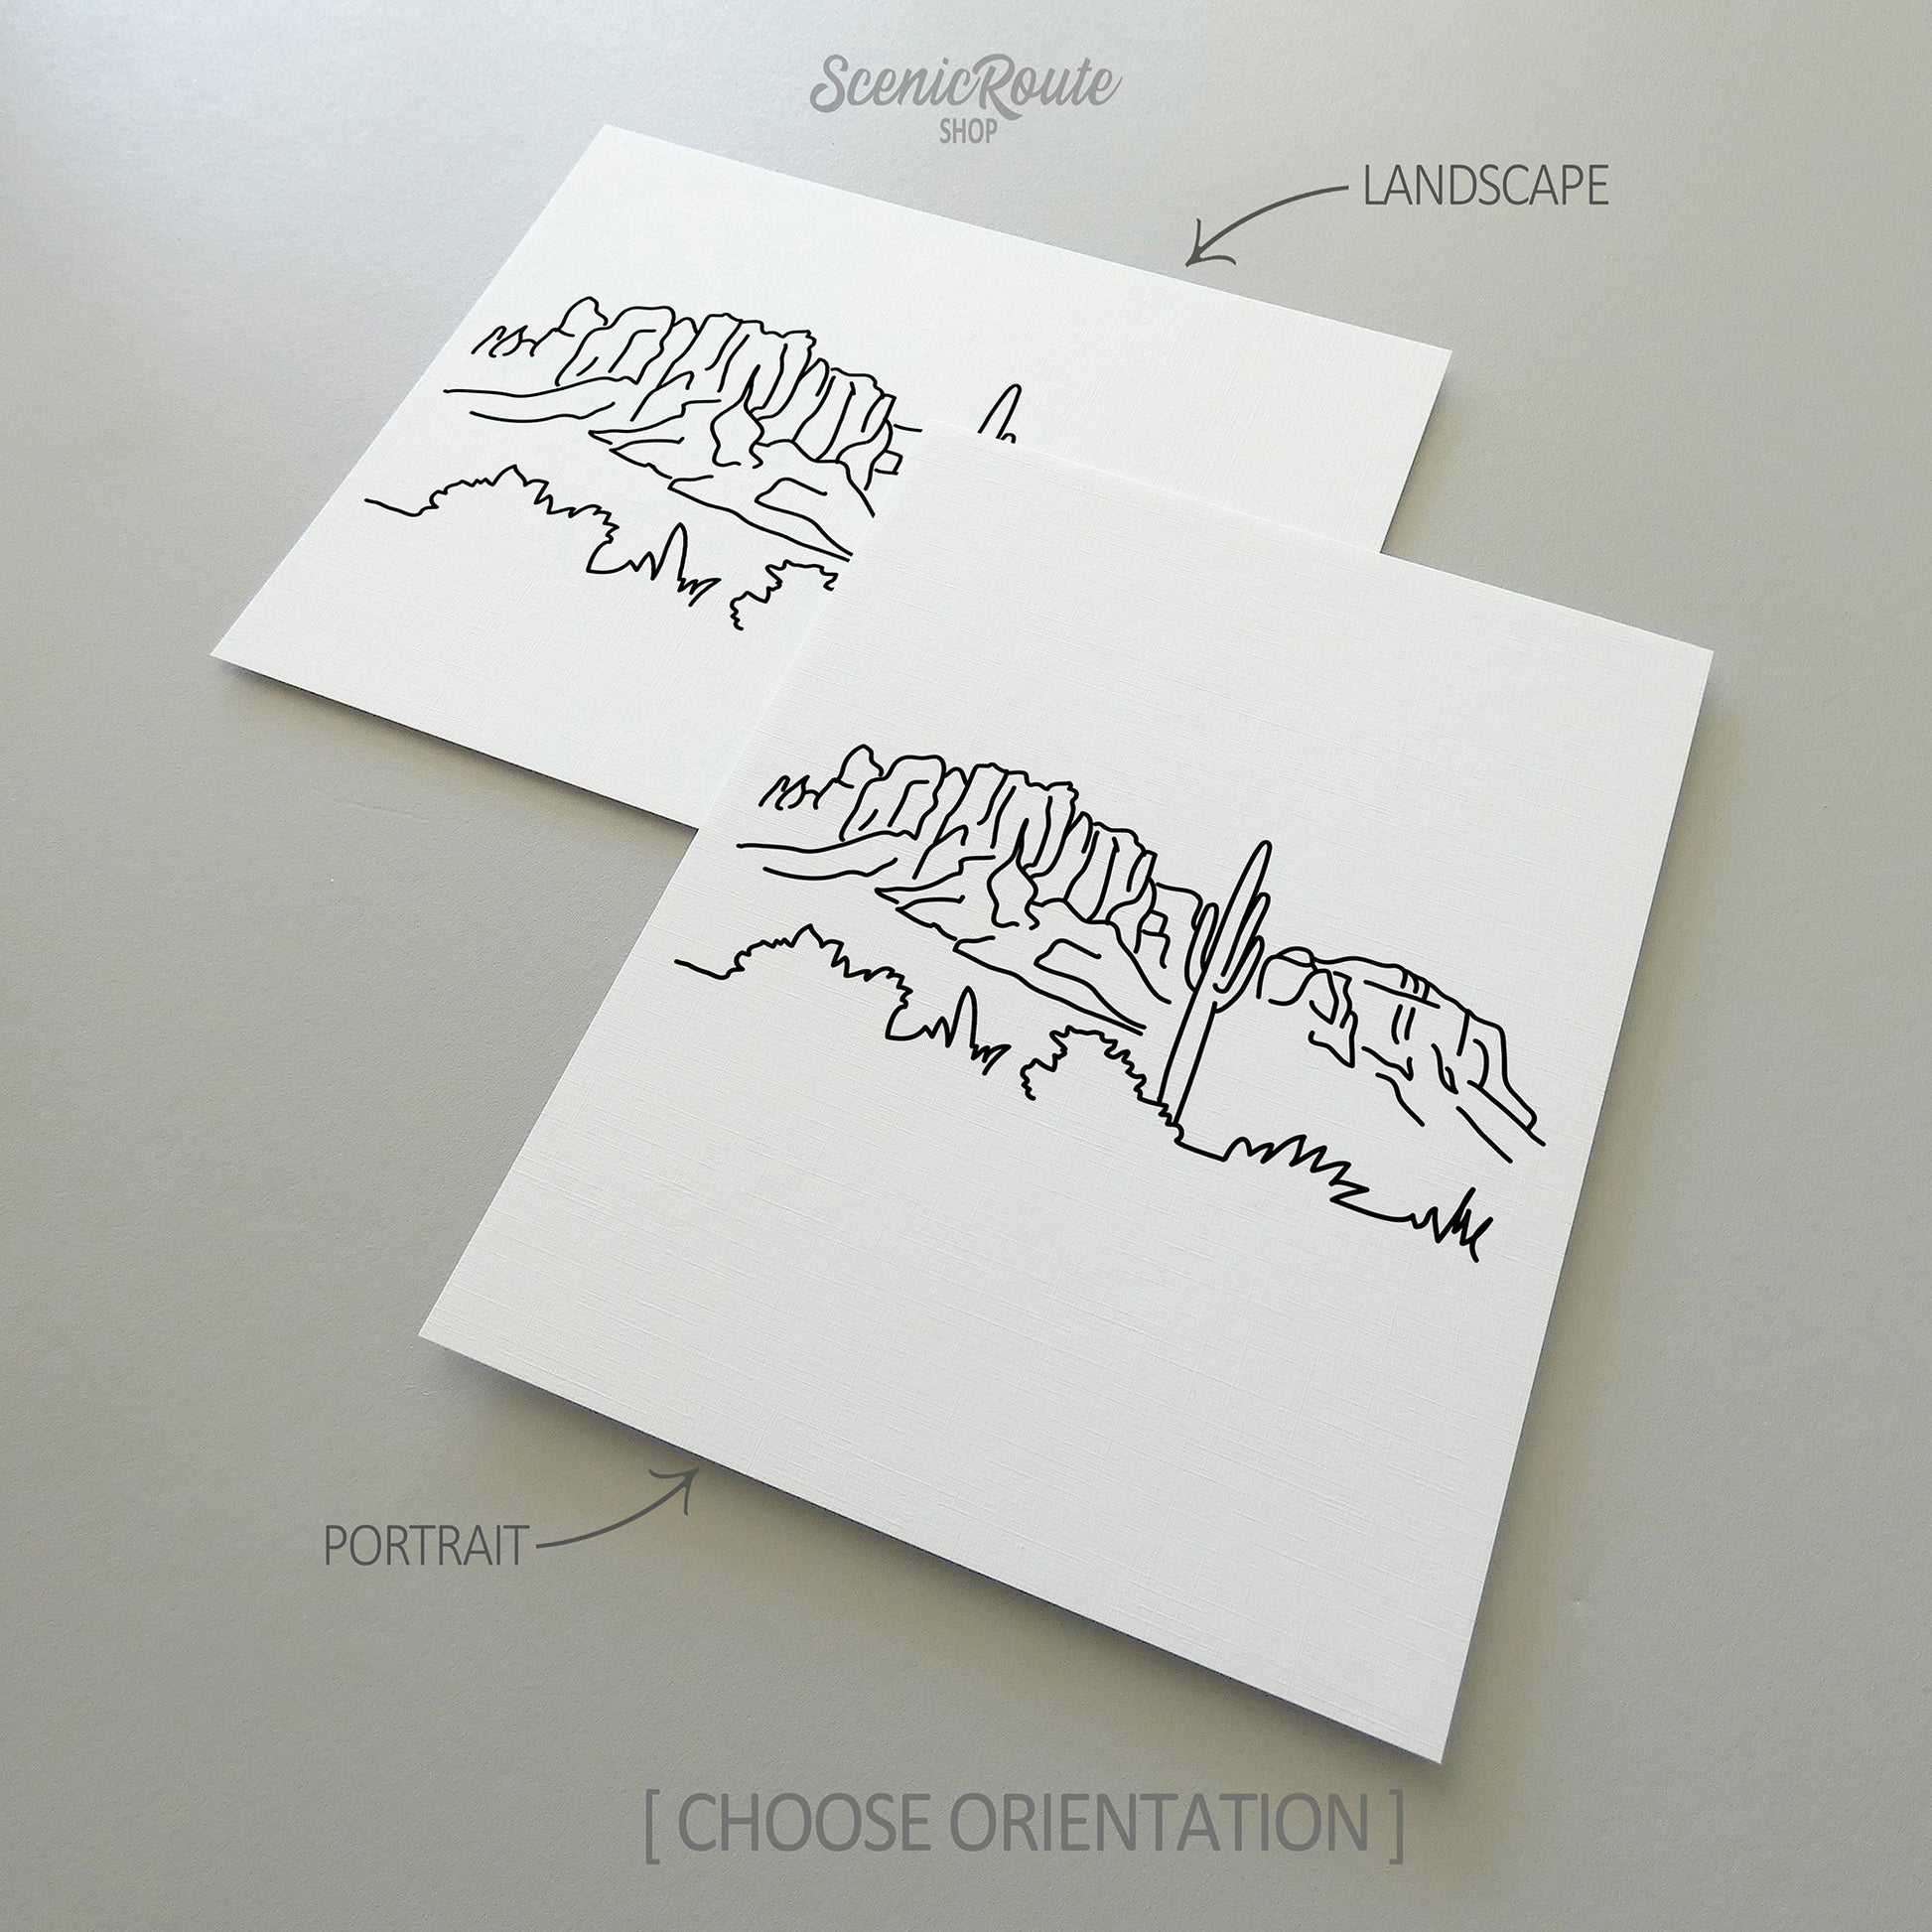 Two line art drawings of Superstition Mountains on white linen paper with a gray background.  The pieces are shown in portrait and landscape orientation for the available art print options.